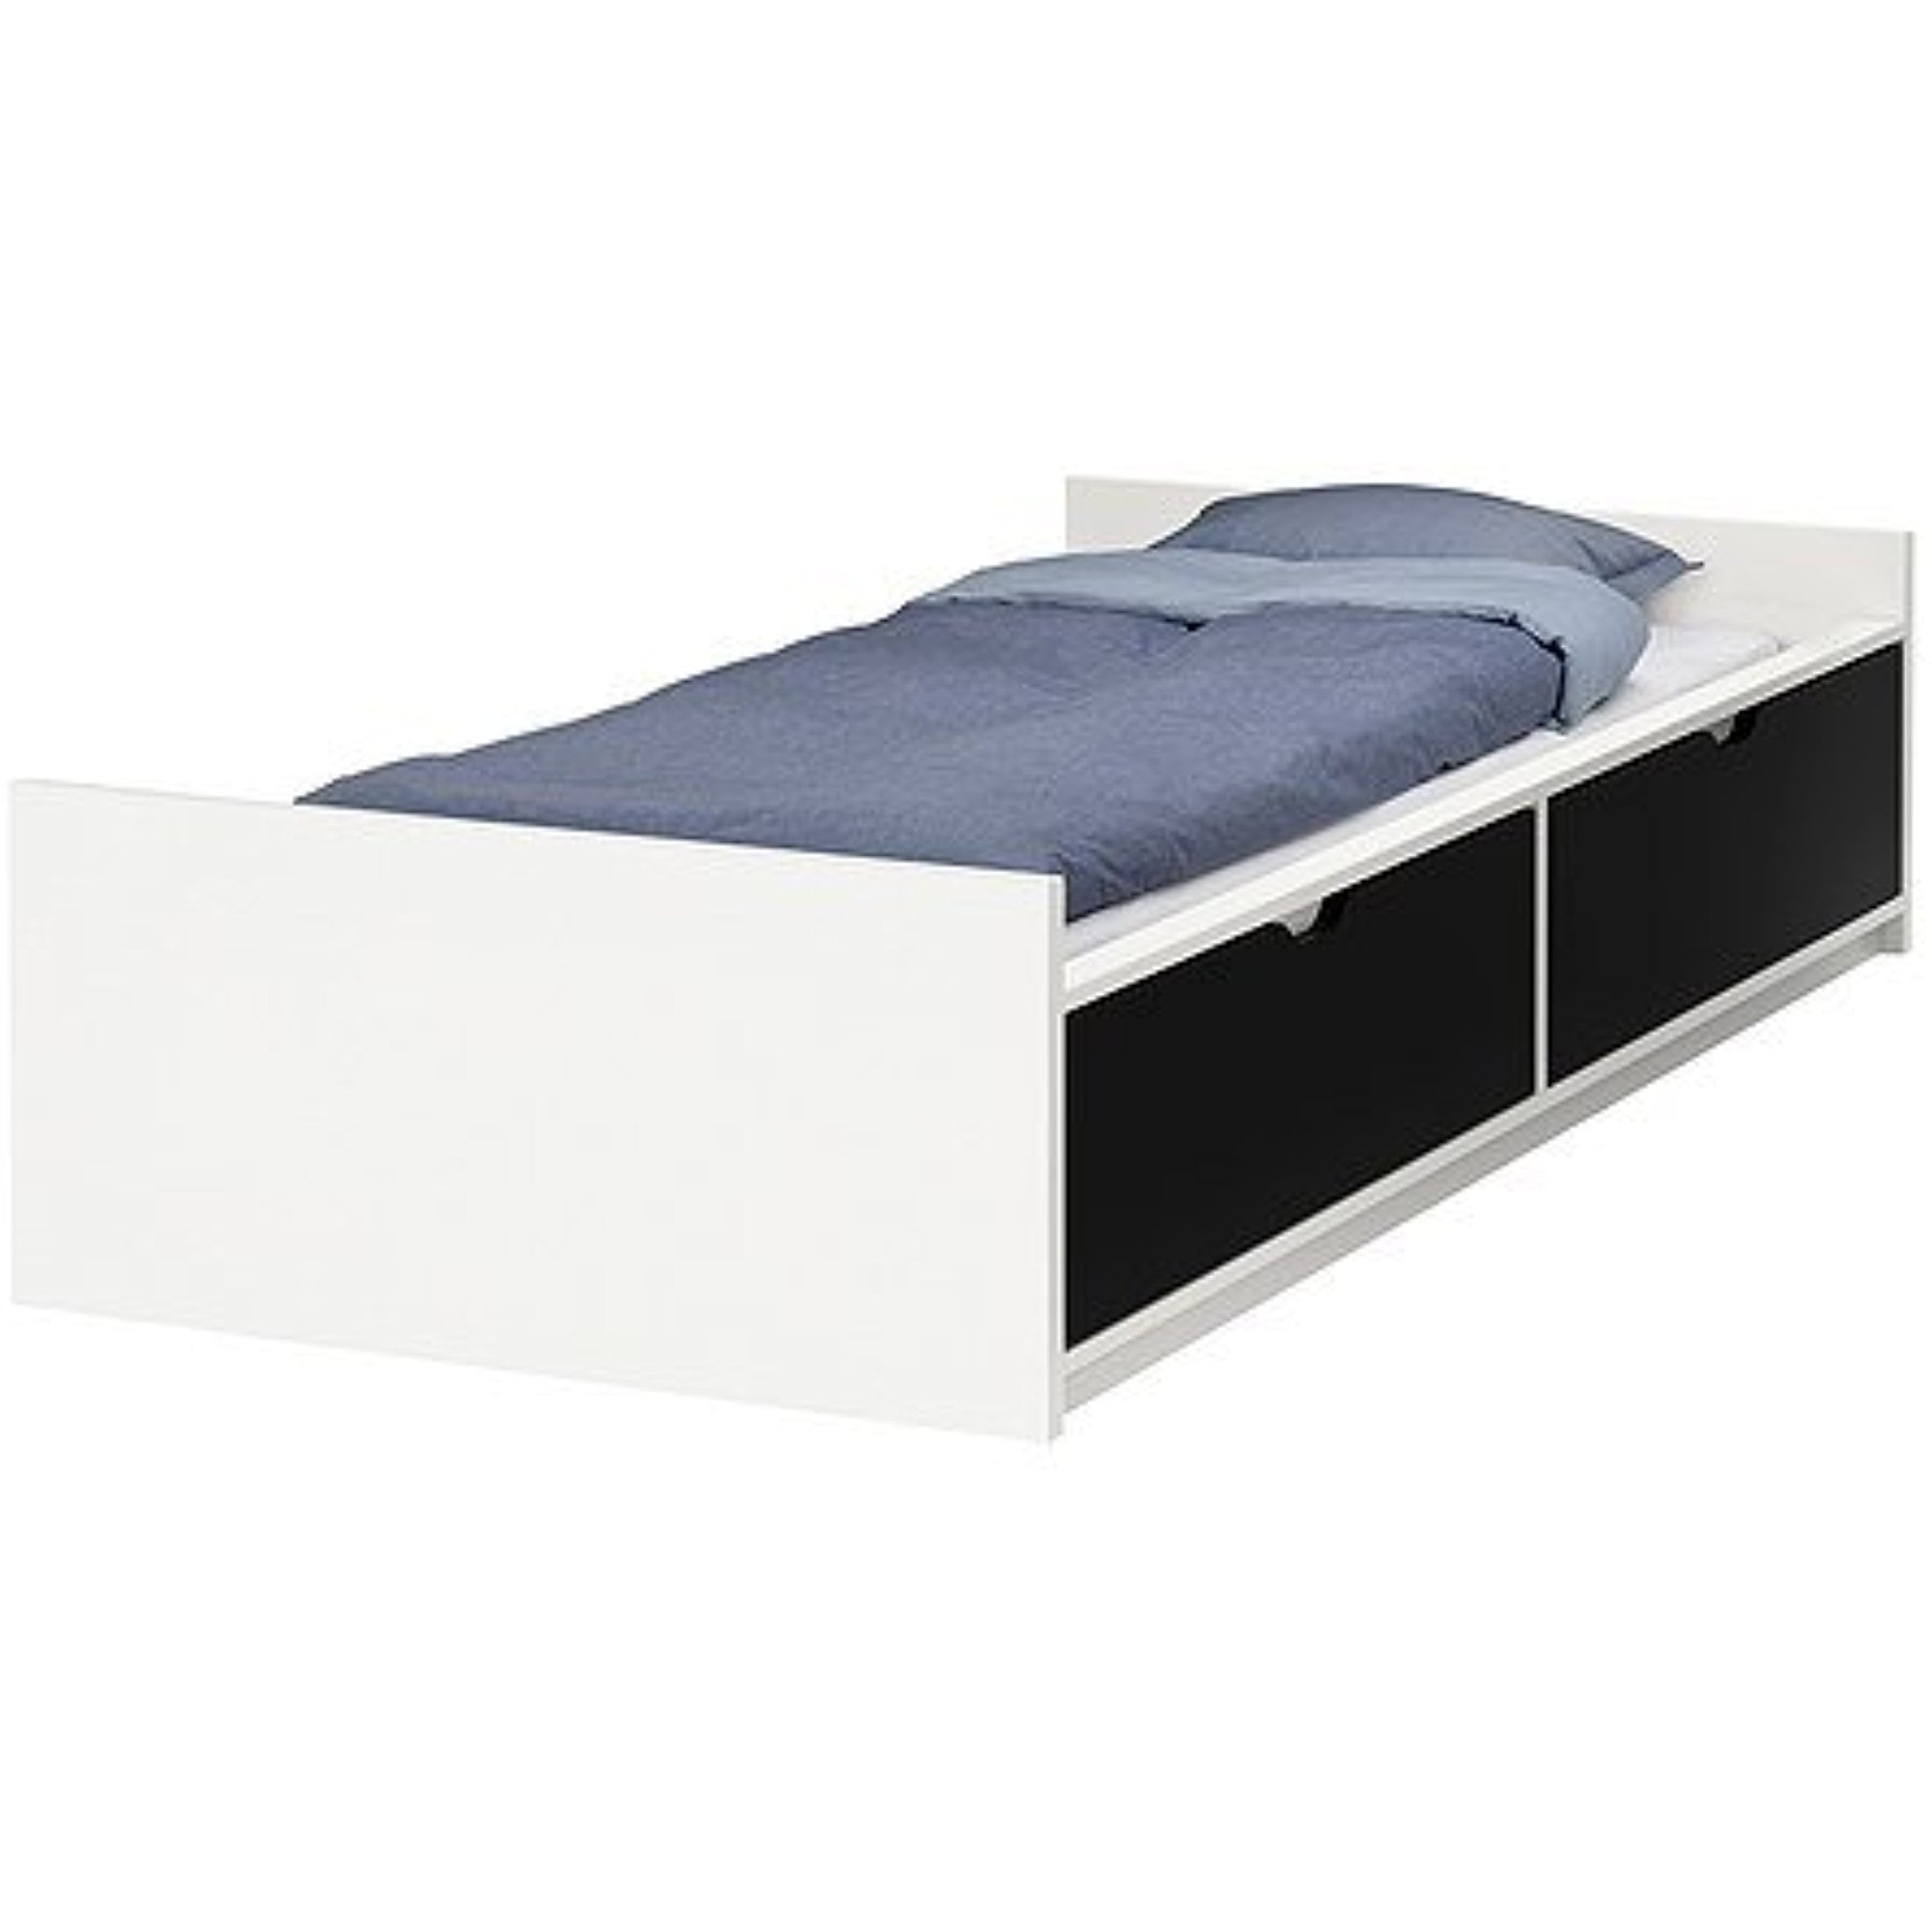 Ikea Twin Size Bed Frame W, Twin Bed For Toddler Ikea